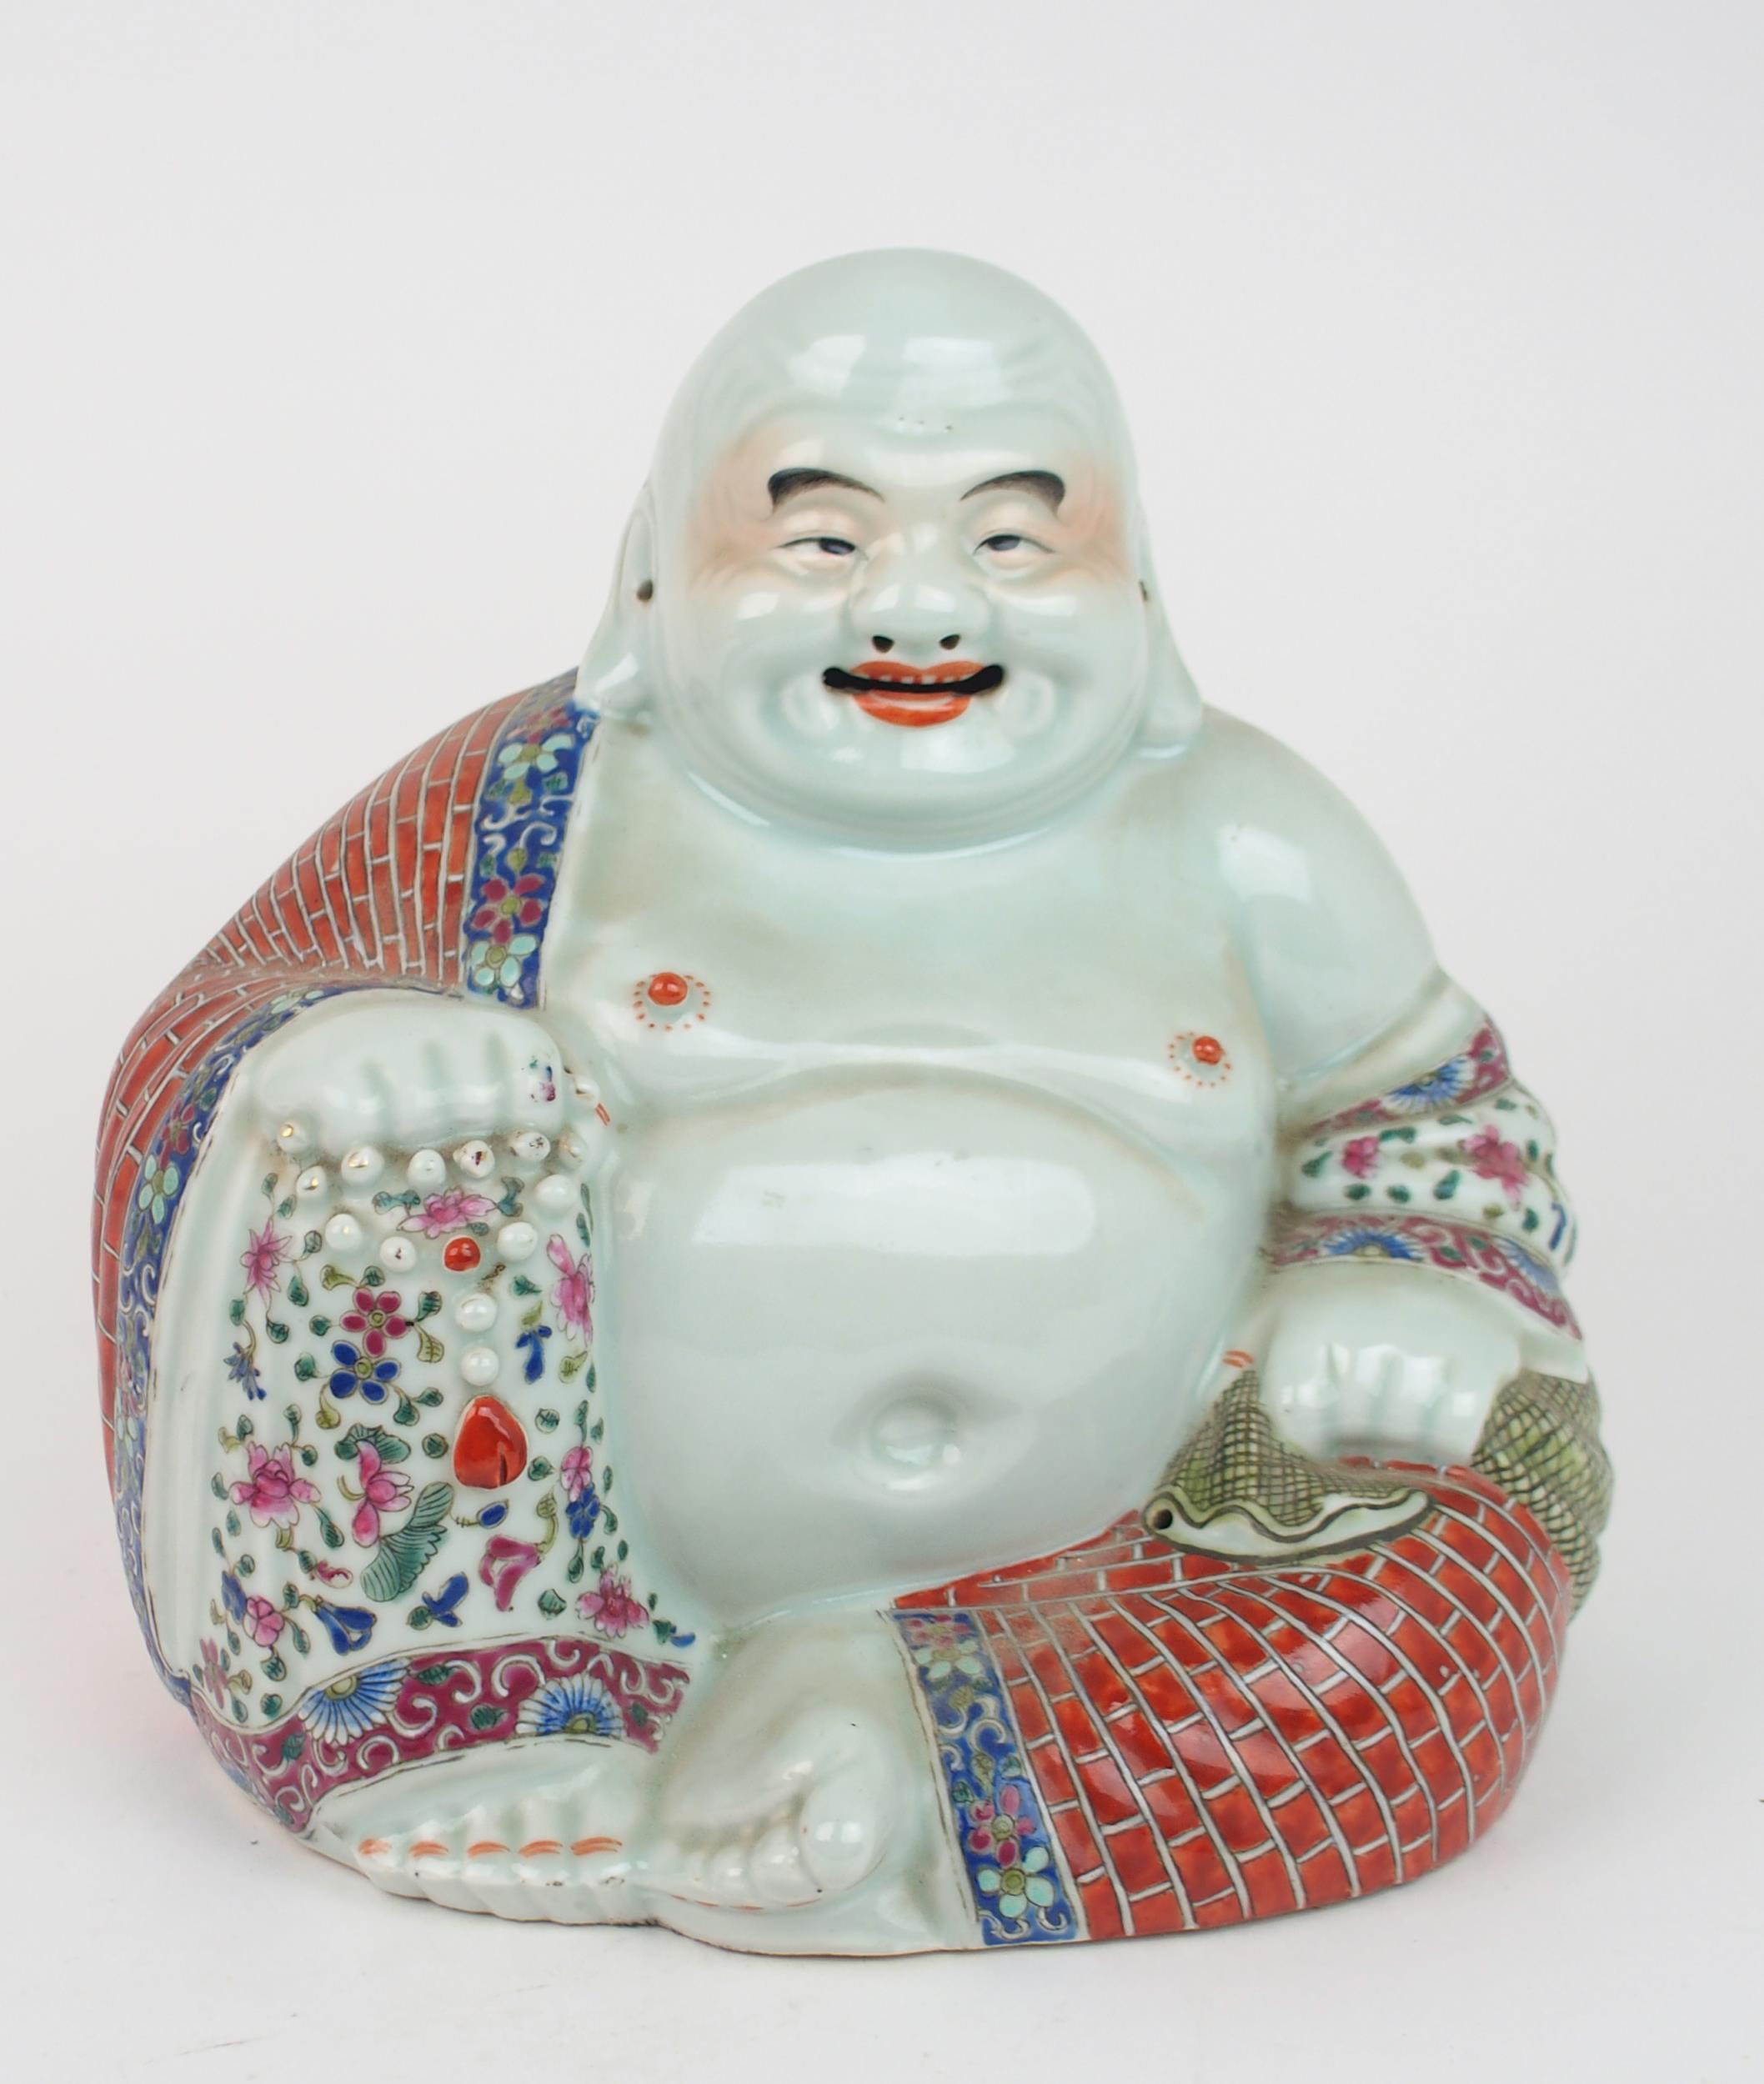 A CHINESE MODEL OF BUDDHA  seated with rosary beads and patterned costume, on a wooden stand, - Image 5 of 9